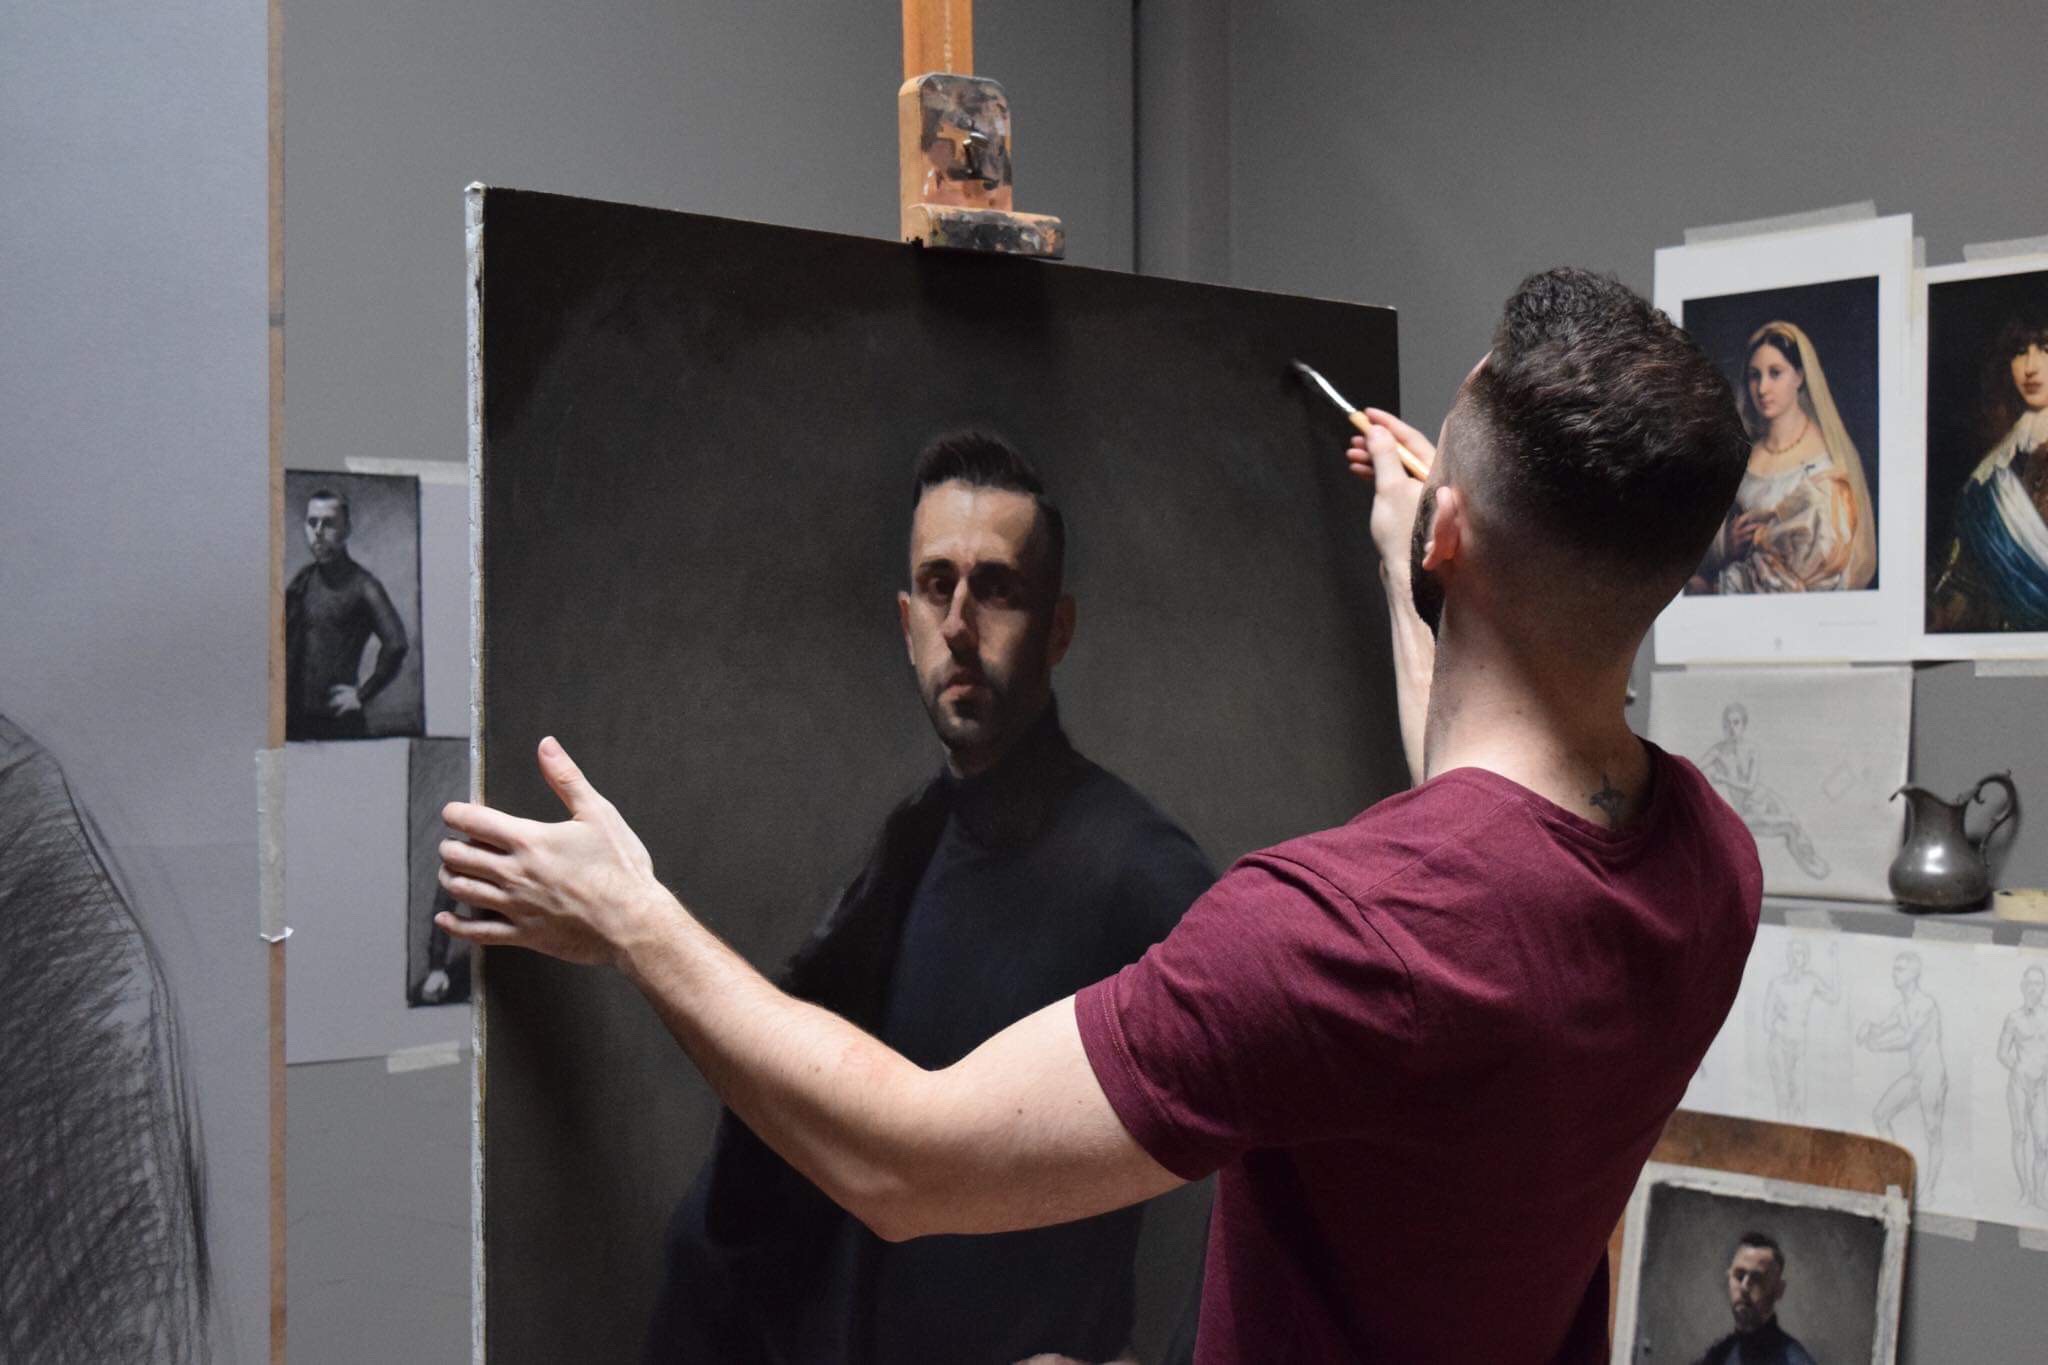 Eric Drummond at the easel, painting a realism portait